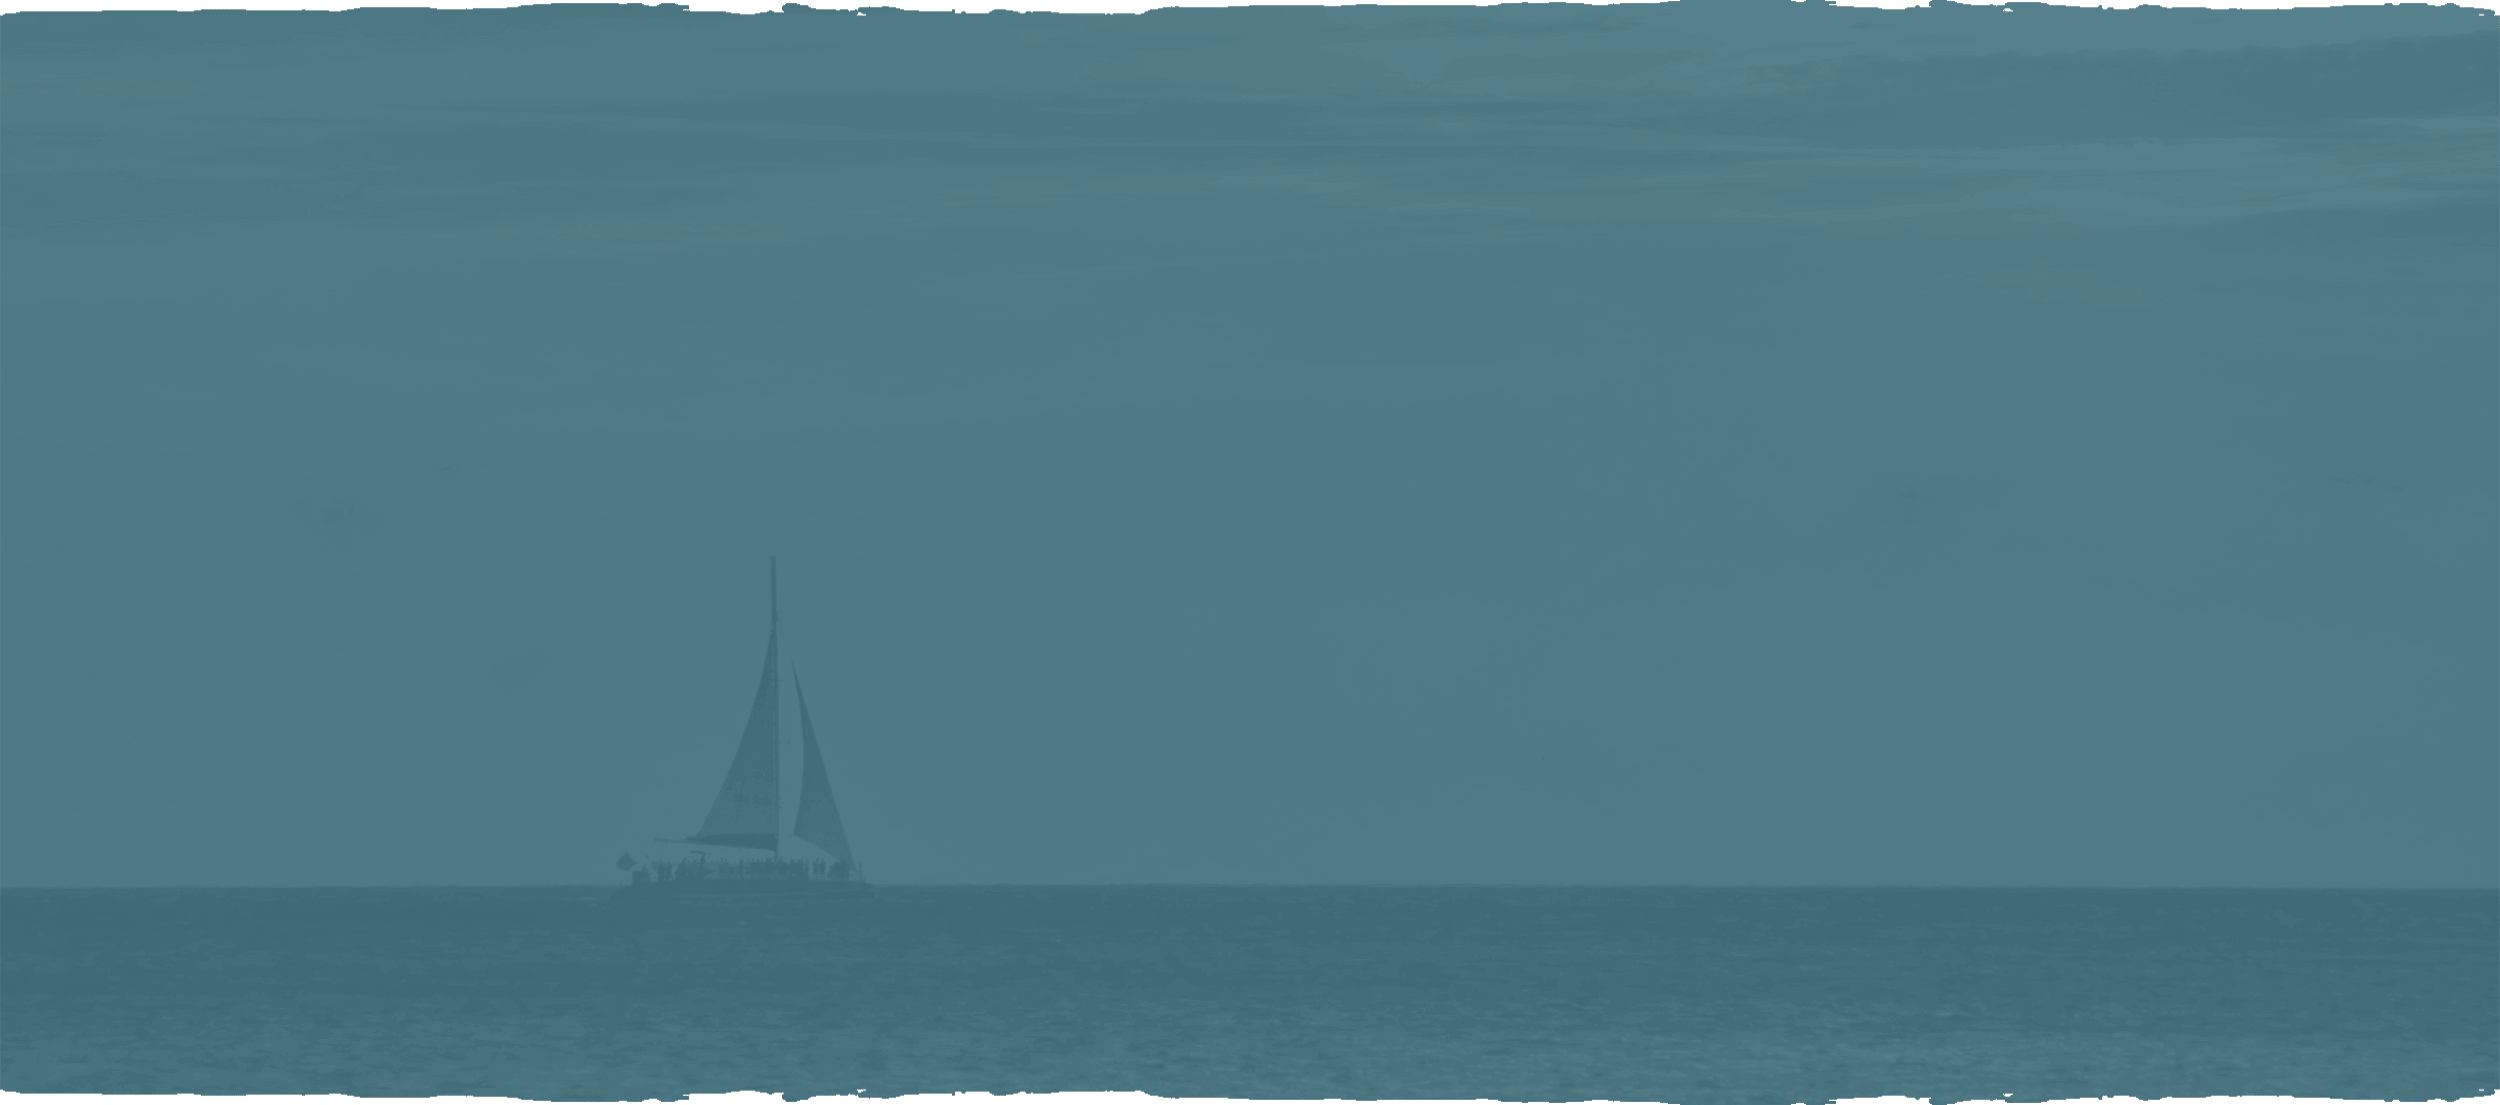 sailing boat on the water